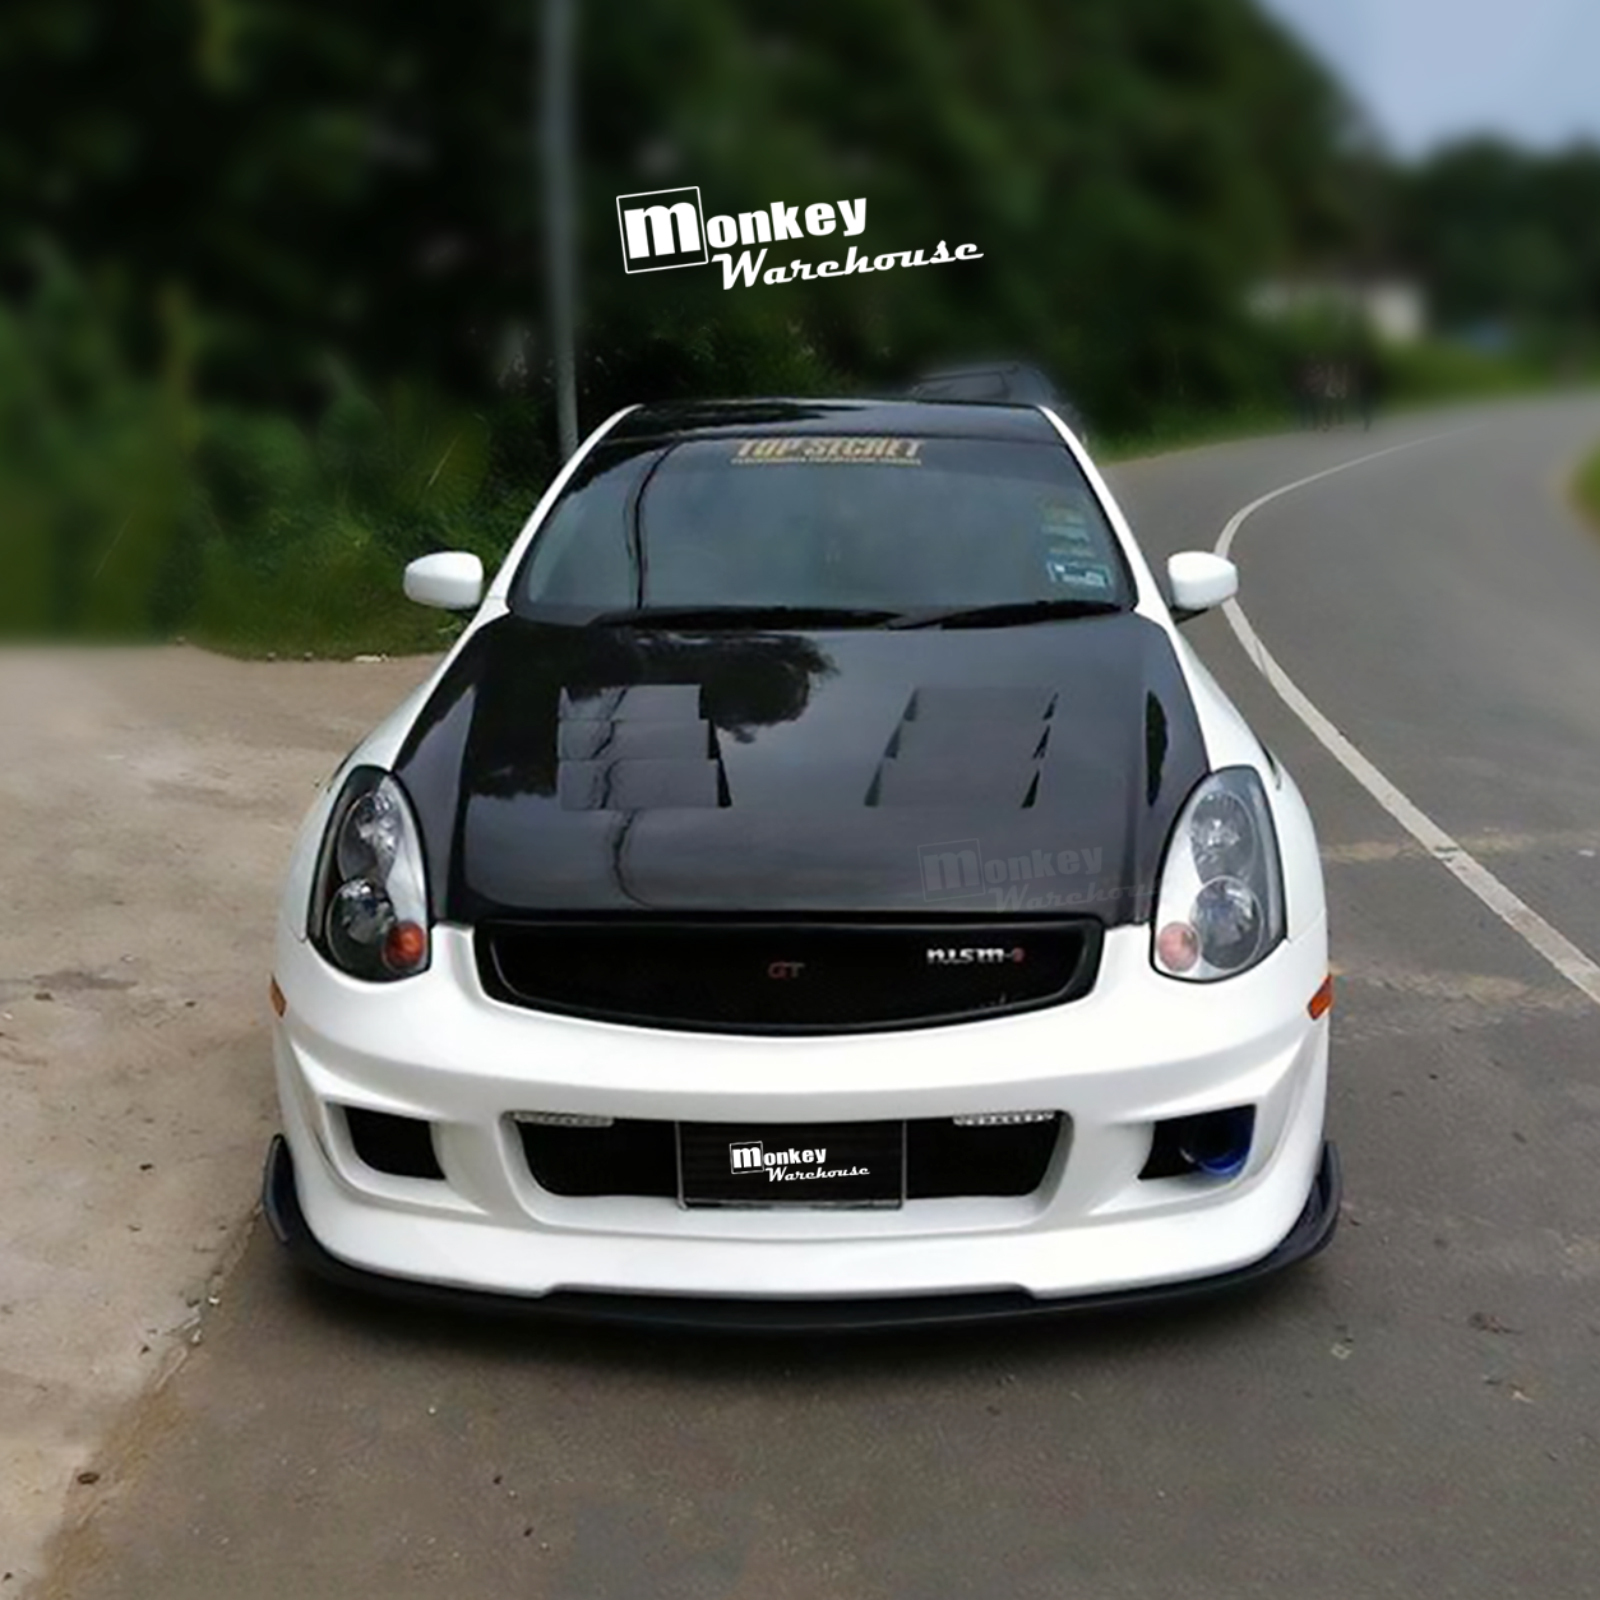 NEW TRUST GREDDY FRONT BUMPER FOR NISSAN V35 SKYLINE COUPE BODY